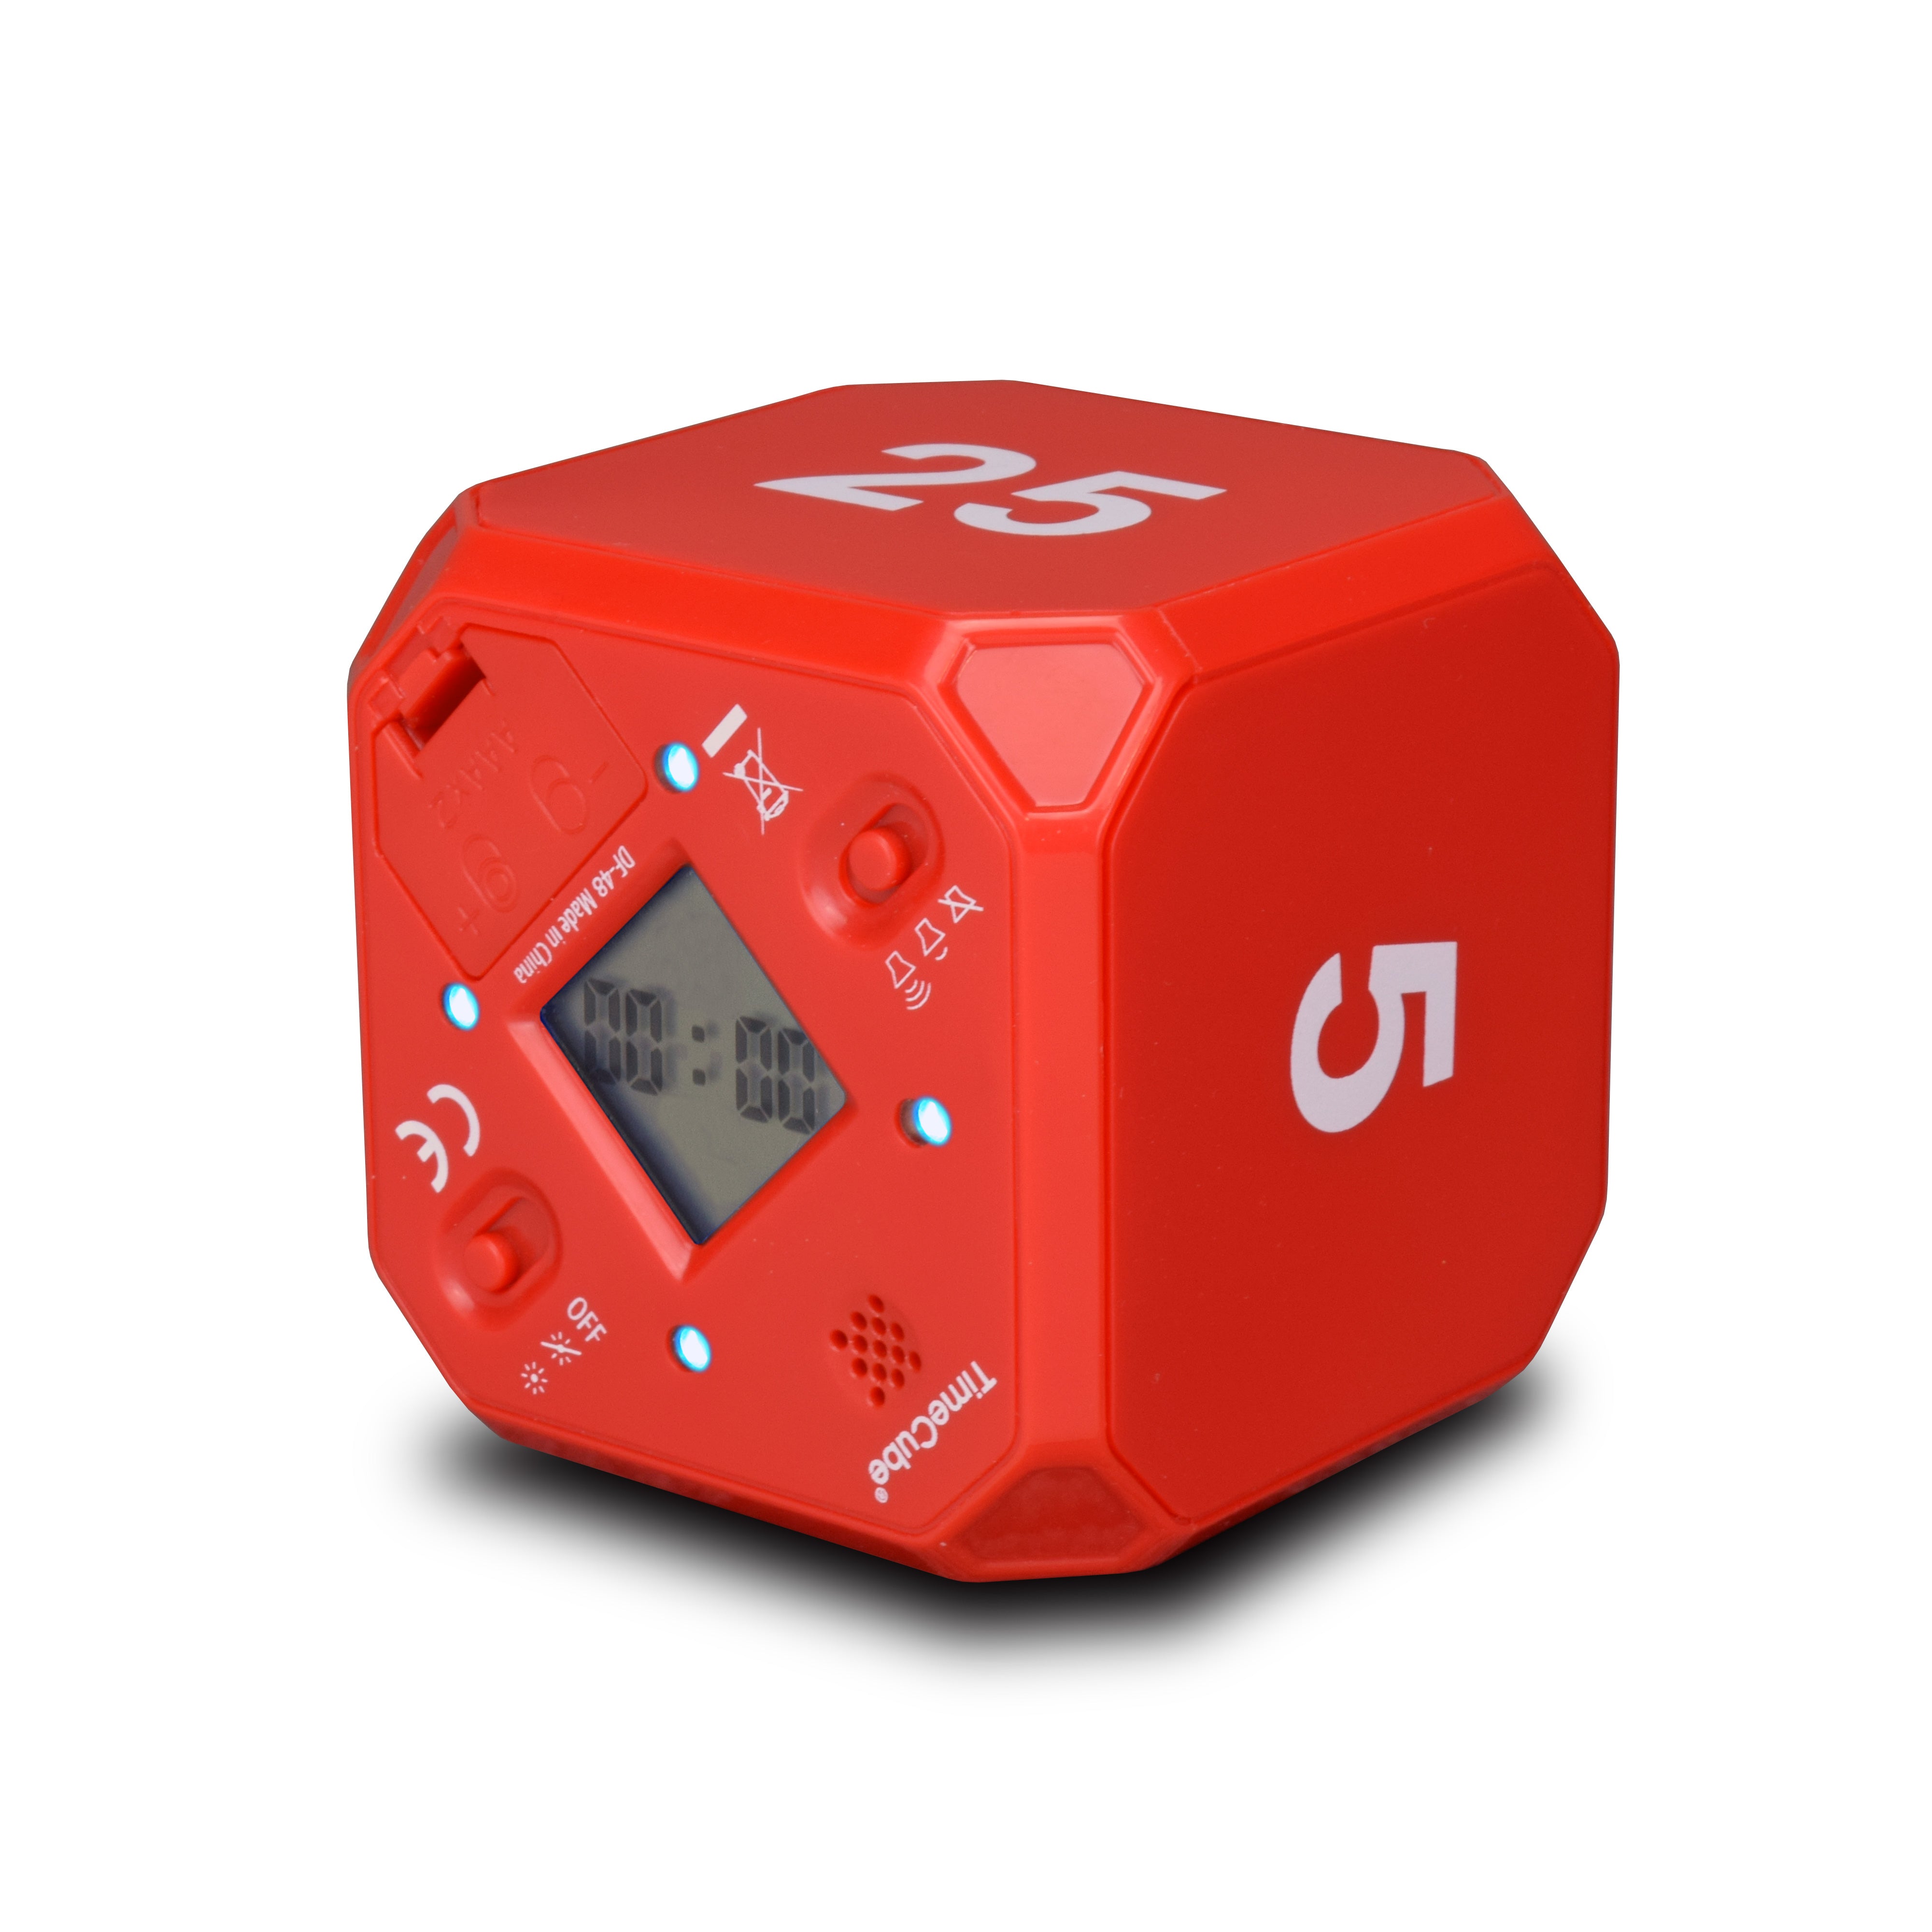 Time Cube DF-48 Pomodoro Timer Red 5, 10, 20, 25 min. – Shop